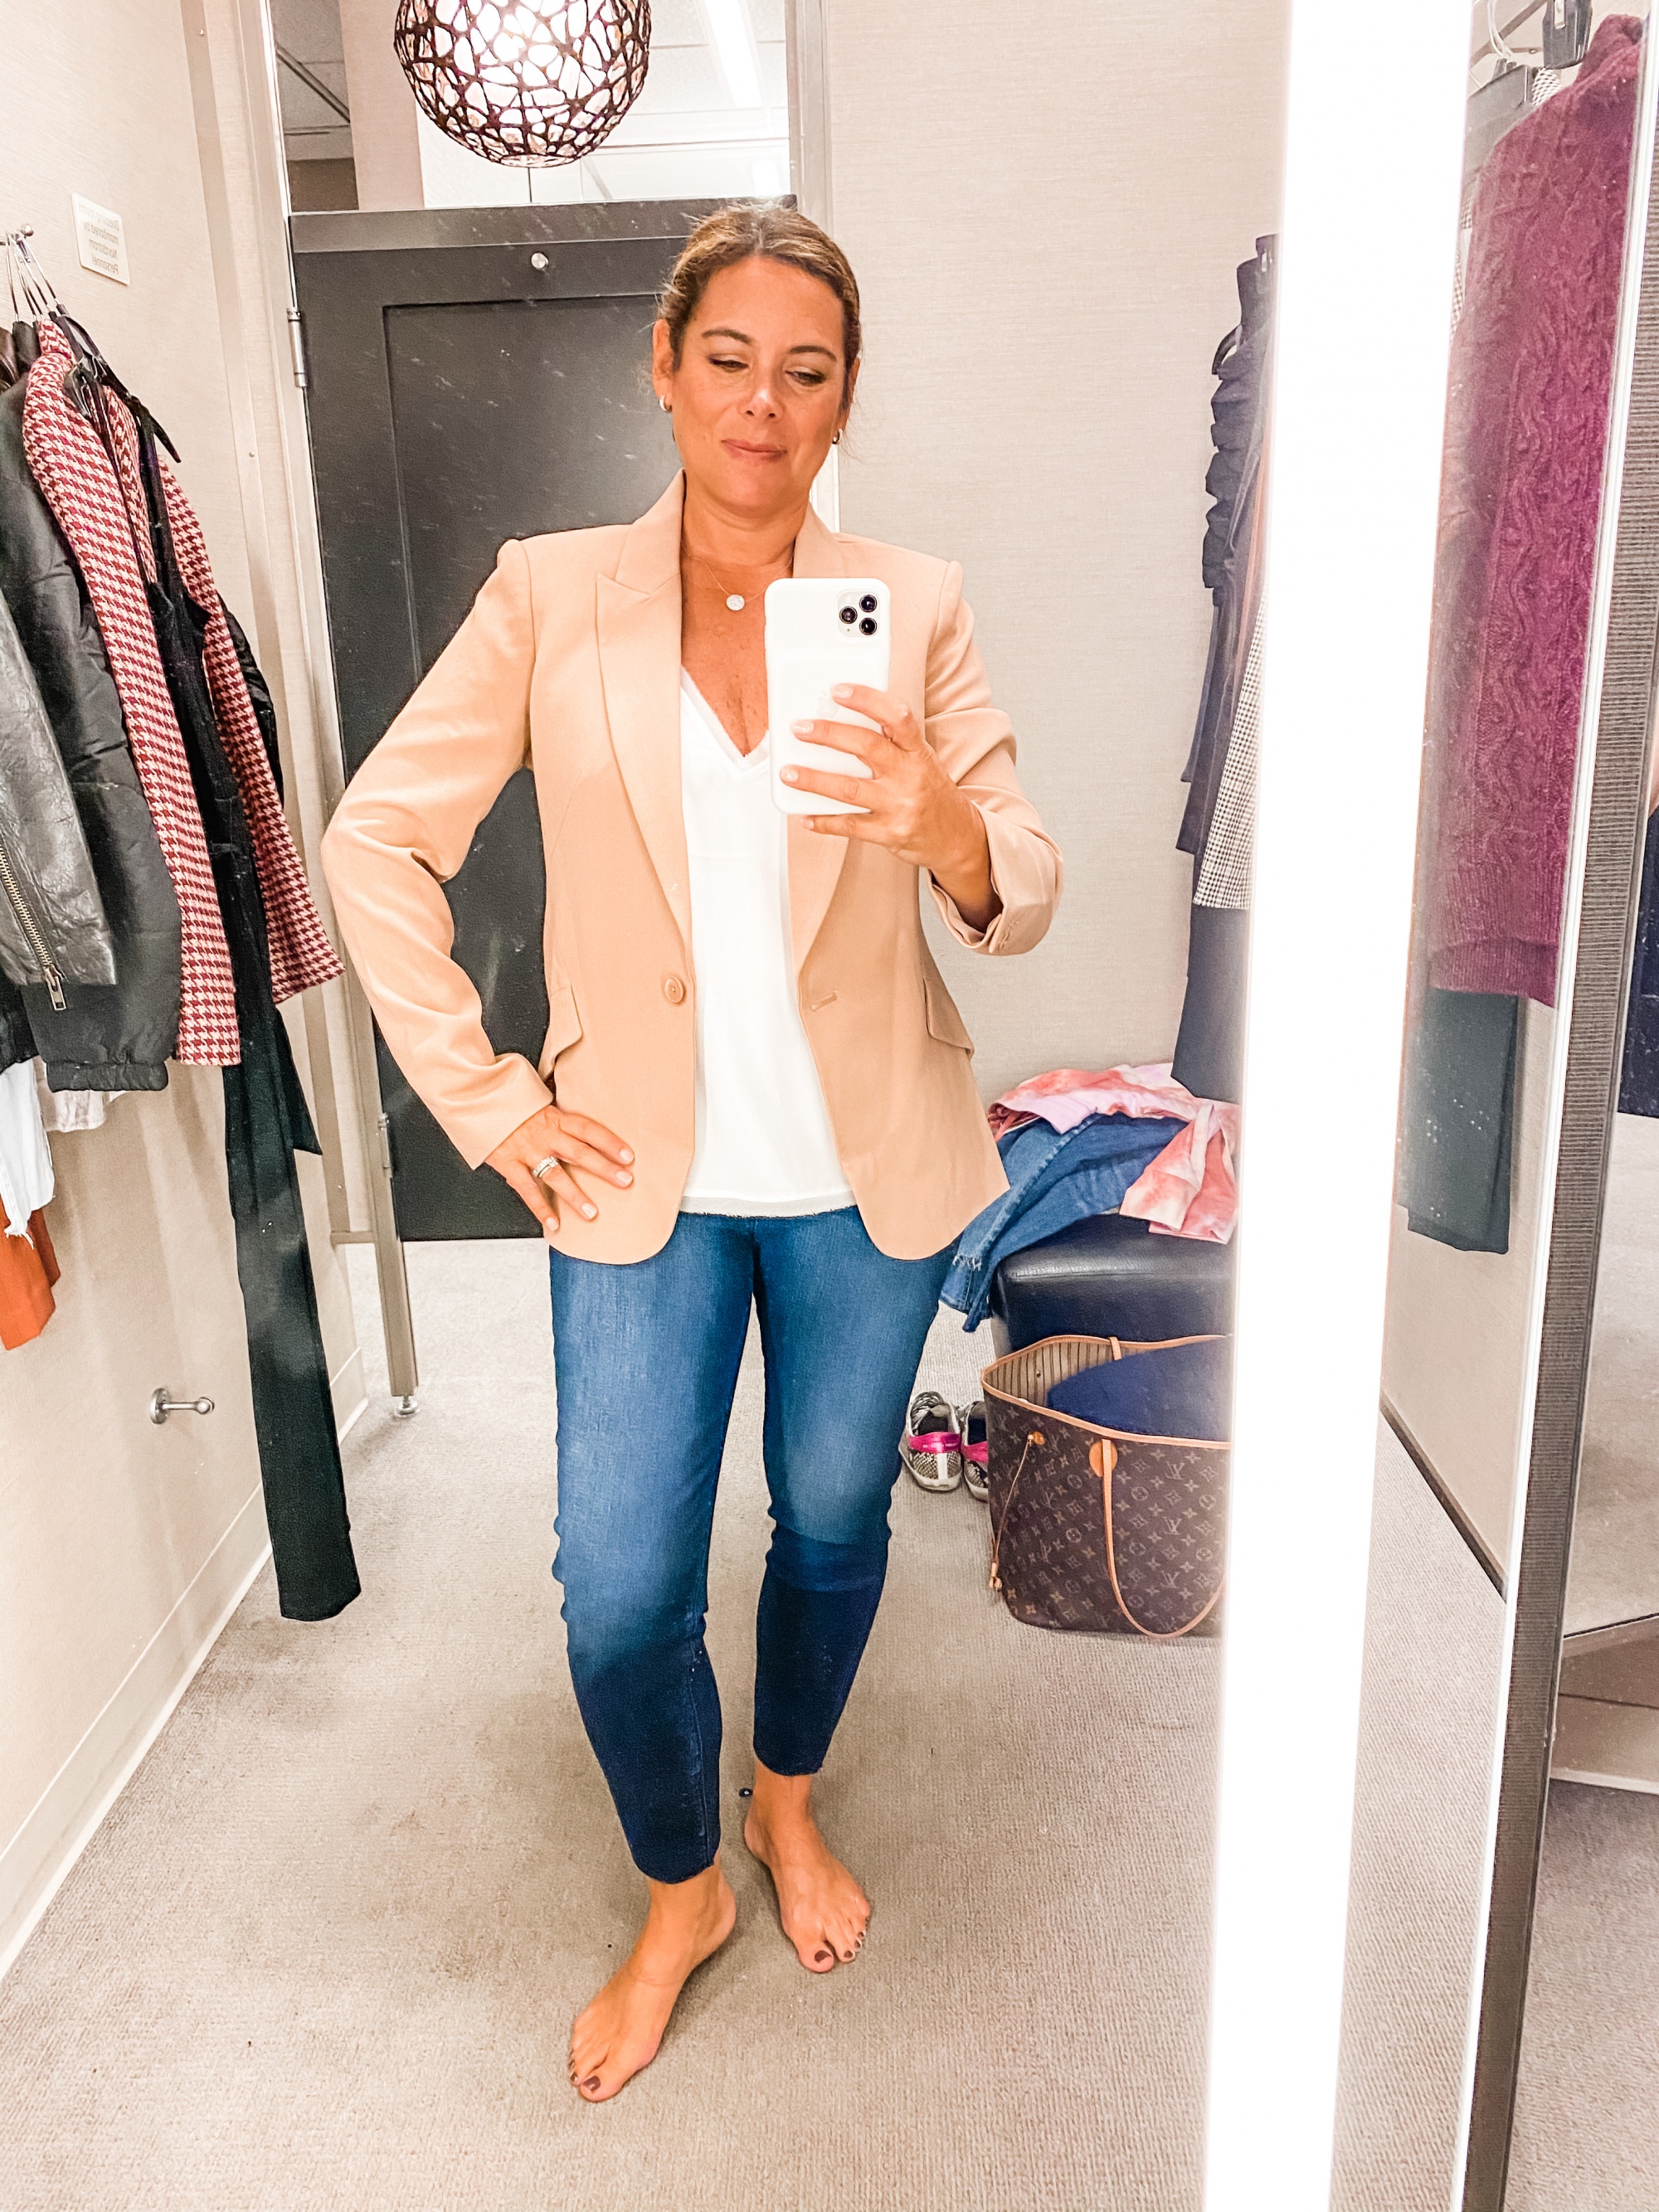 Nordstrom Sale Outfits, Erin Busbee Of Busbee Style And Her Team Sharing Their Favorites From The Nordstrom Anniversary Sale 2020 Including Hive Manager Denise Wearing A Beige L'Agence Blazer